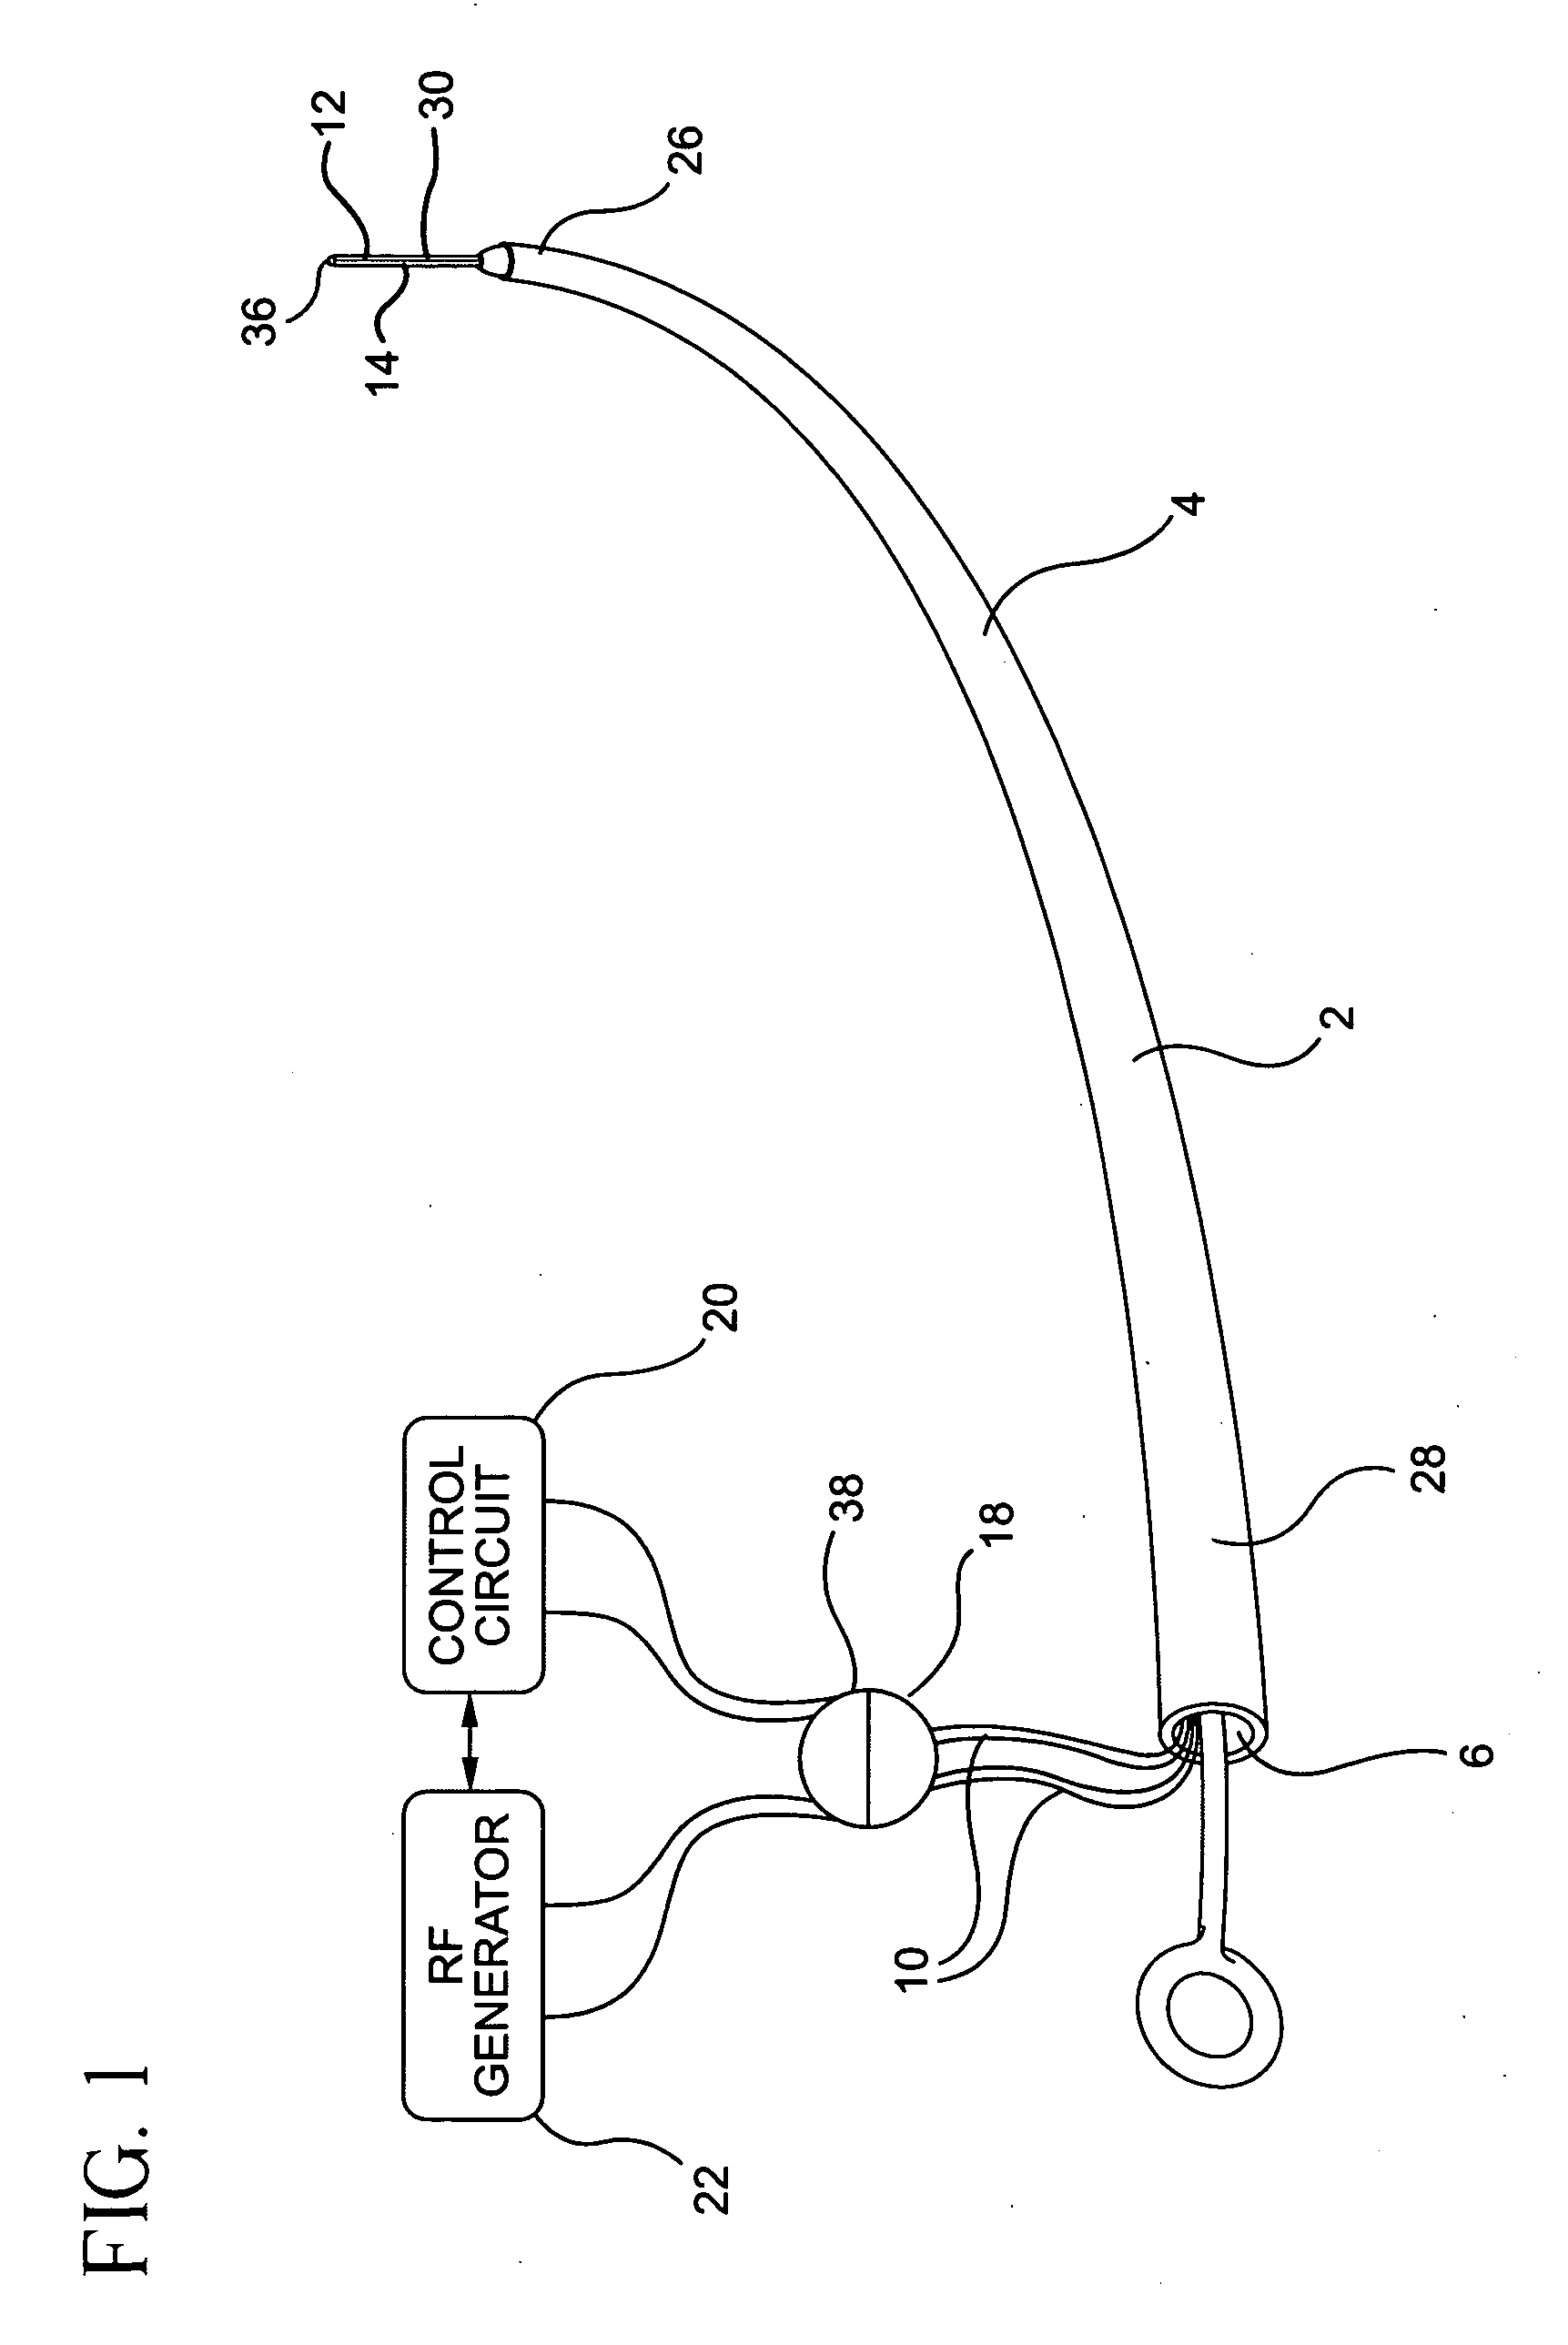 Tubal sterilization device having expanding electrodes and method for performing sterilization using the same